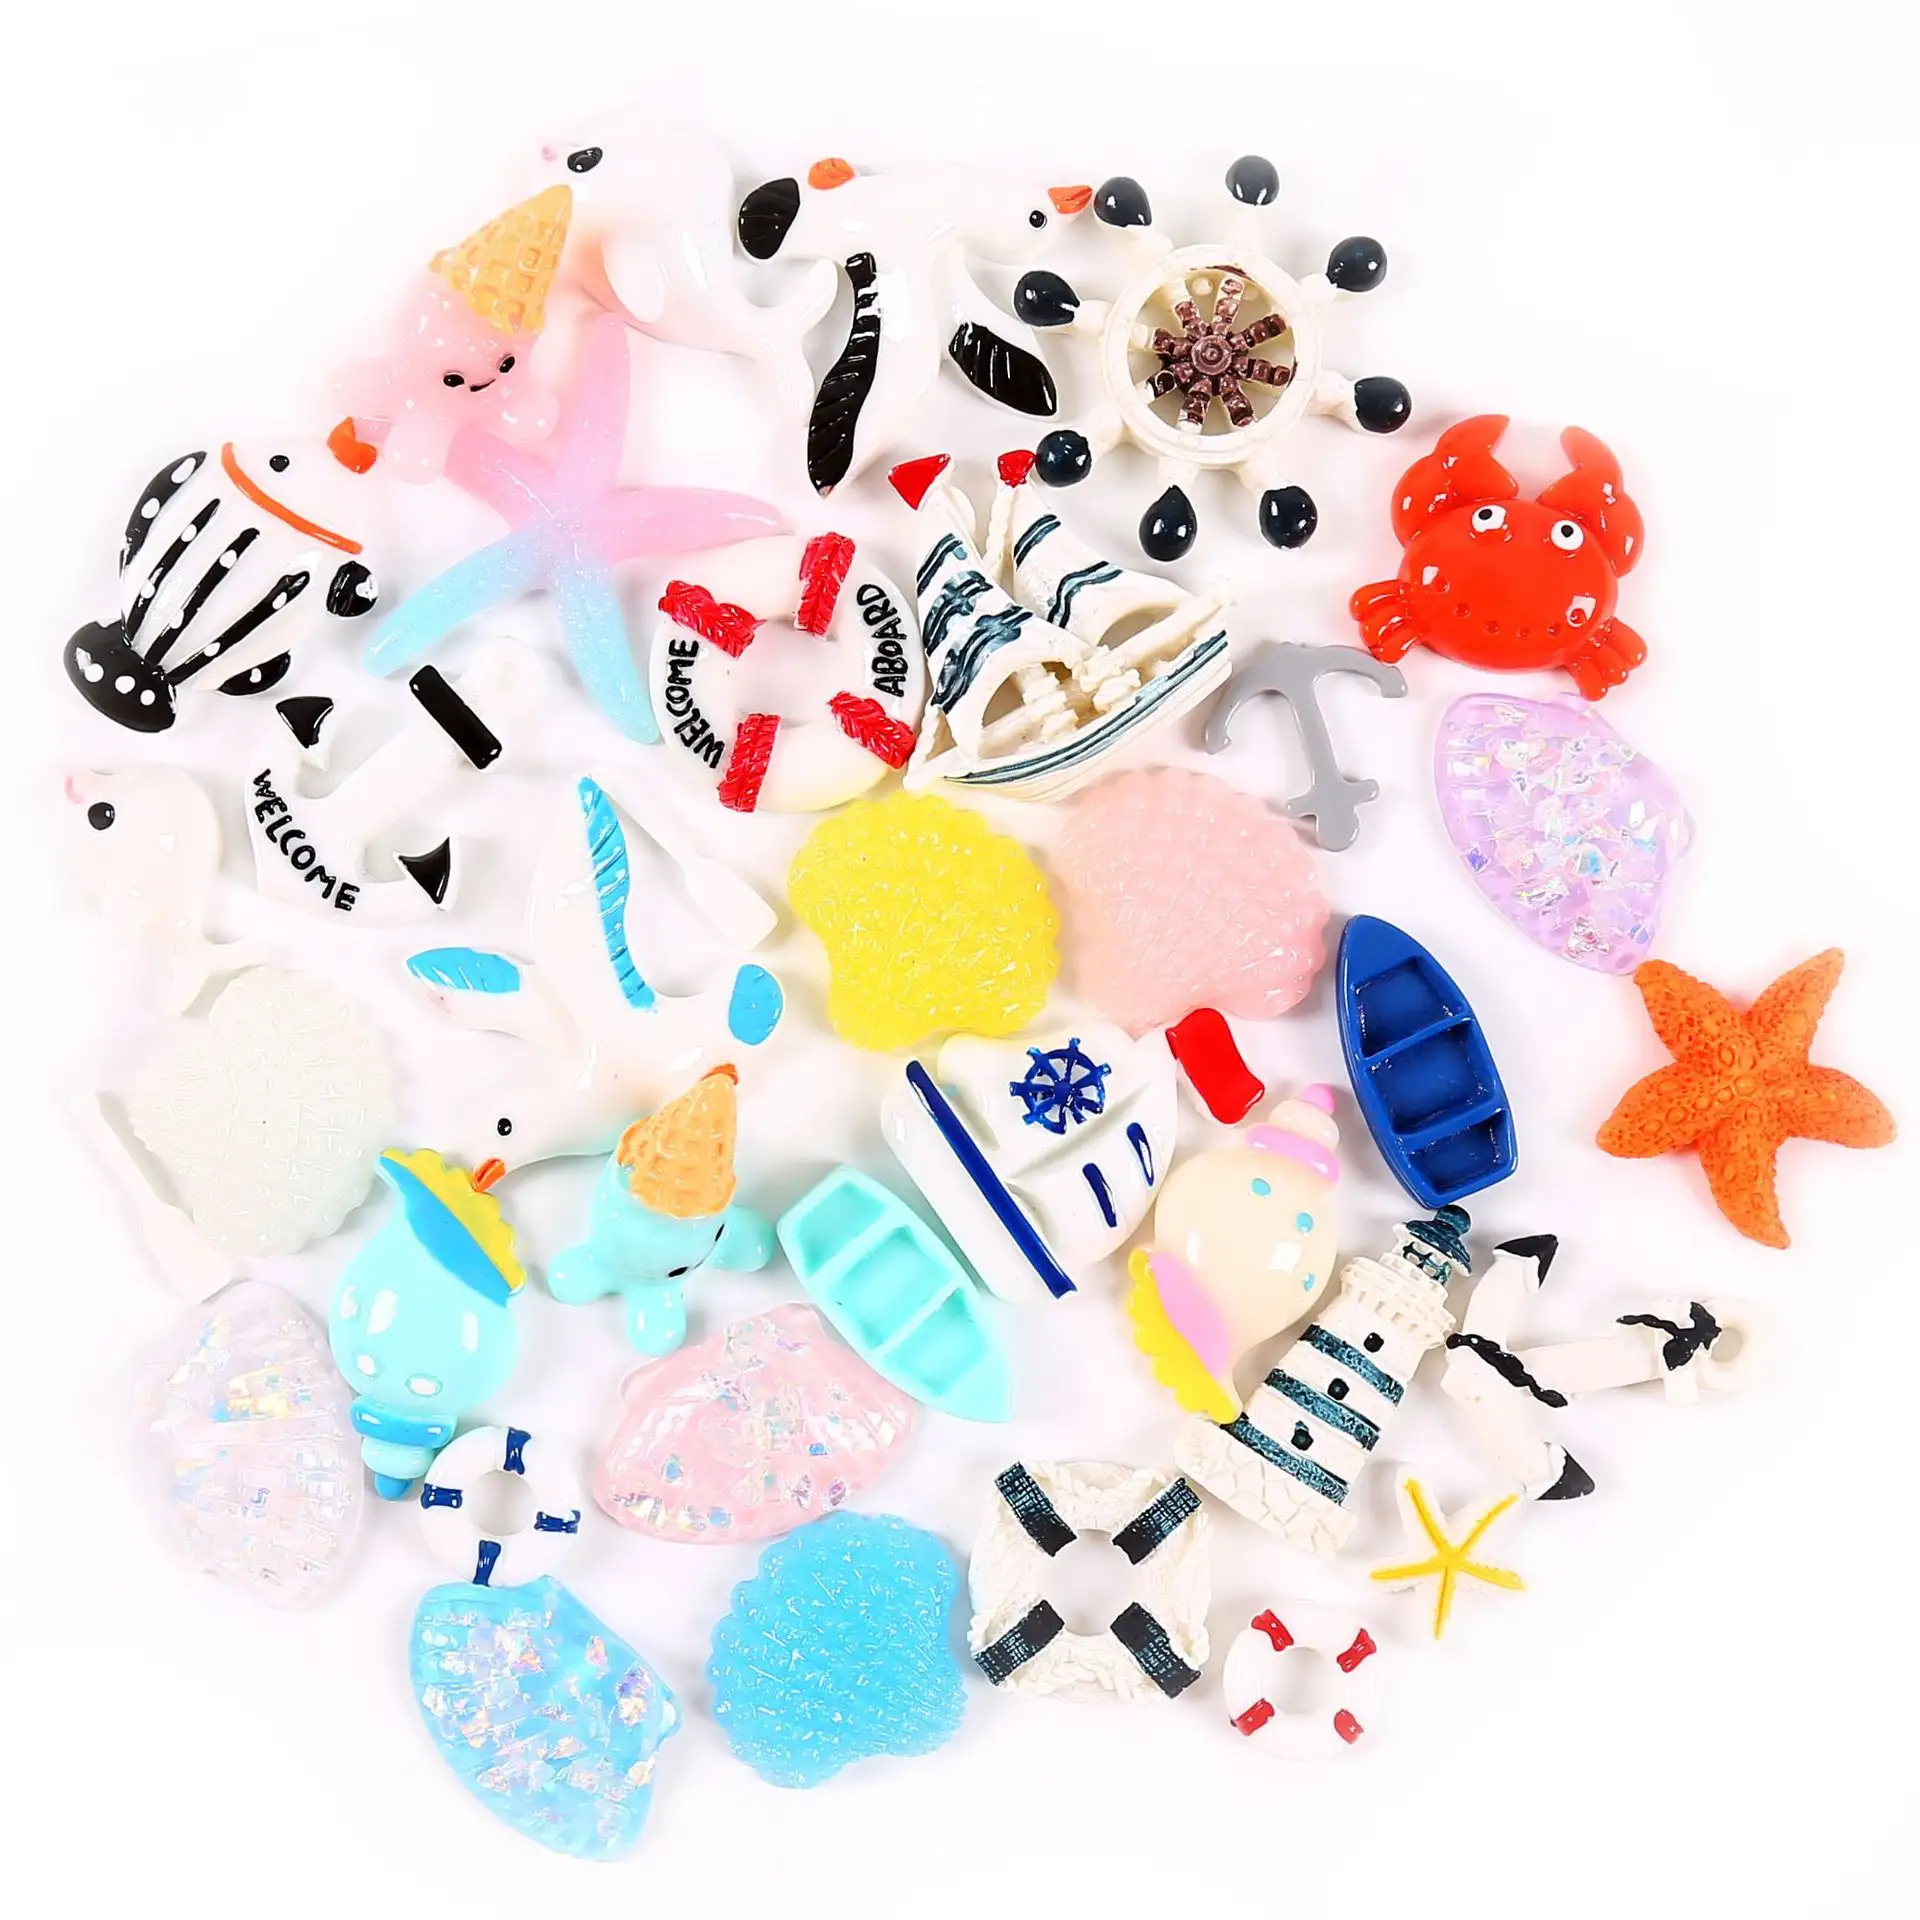 Craft Supplies Cartoon marine style mobile phone case diy material slime slime filler diy accessories resin accessories